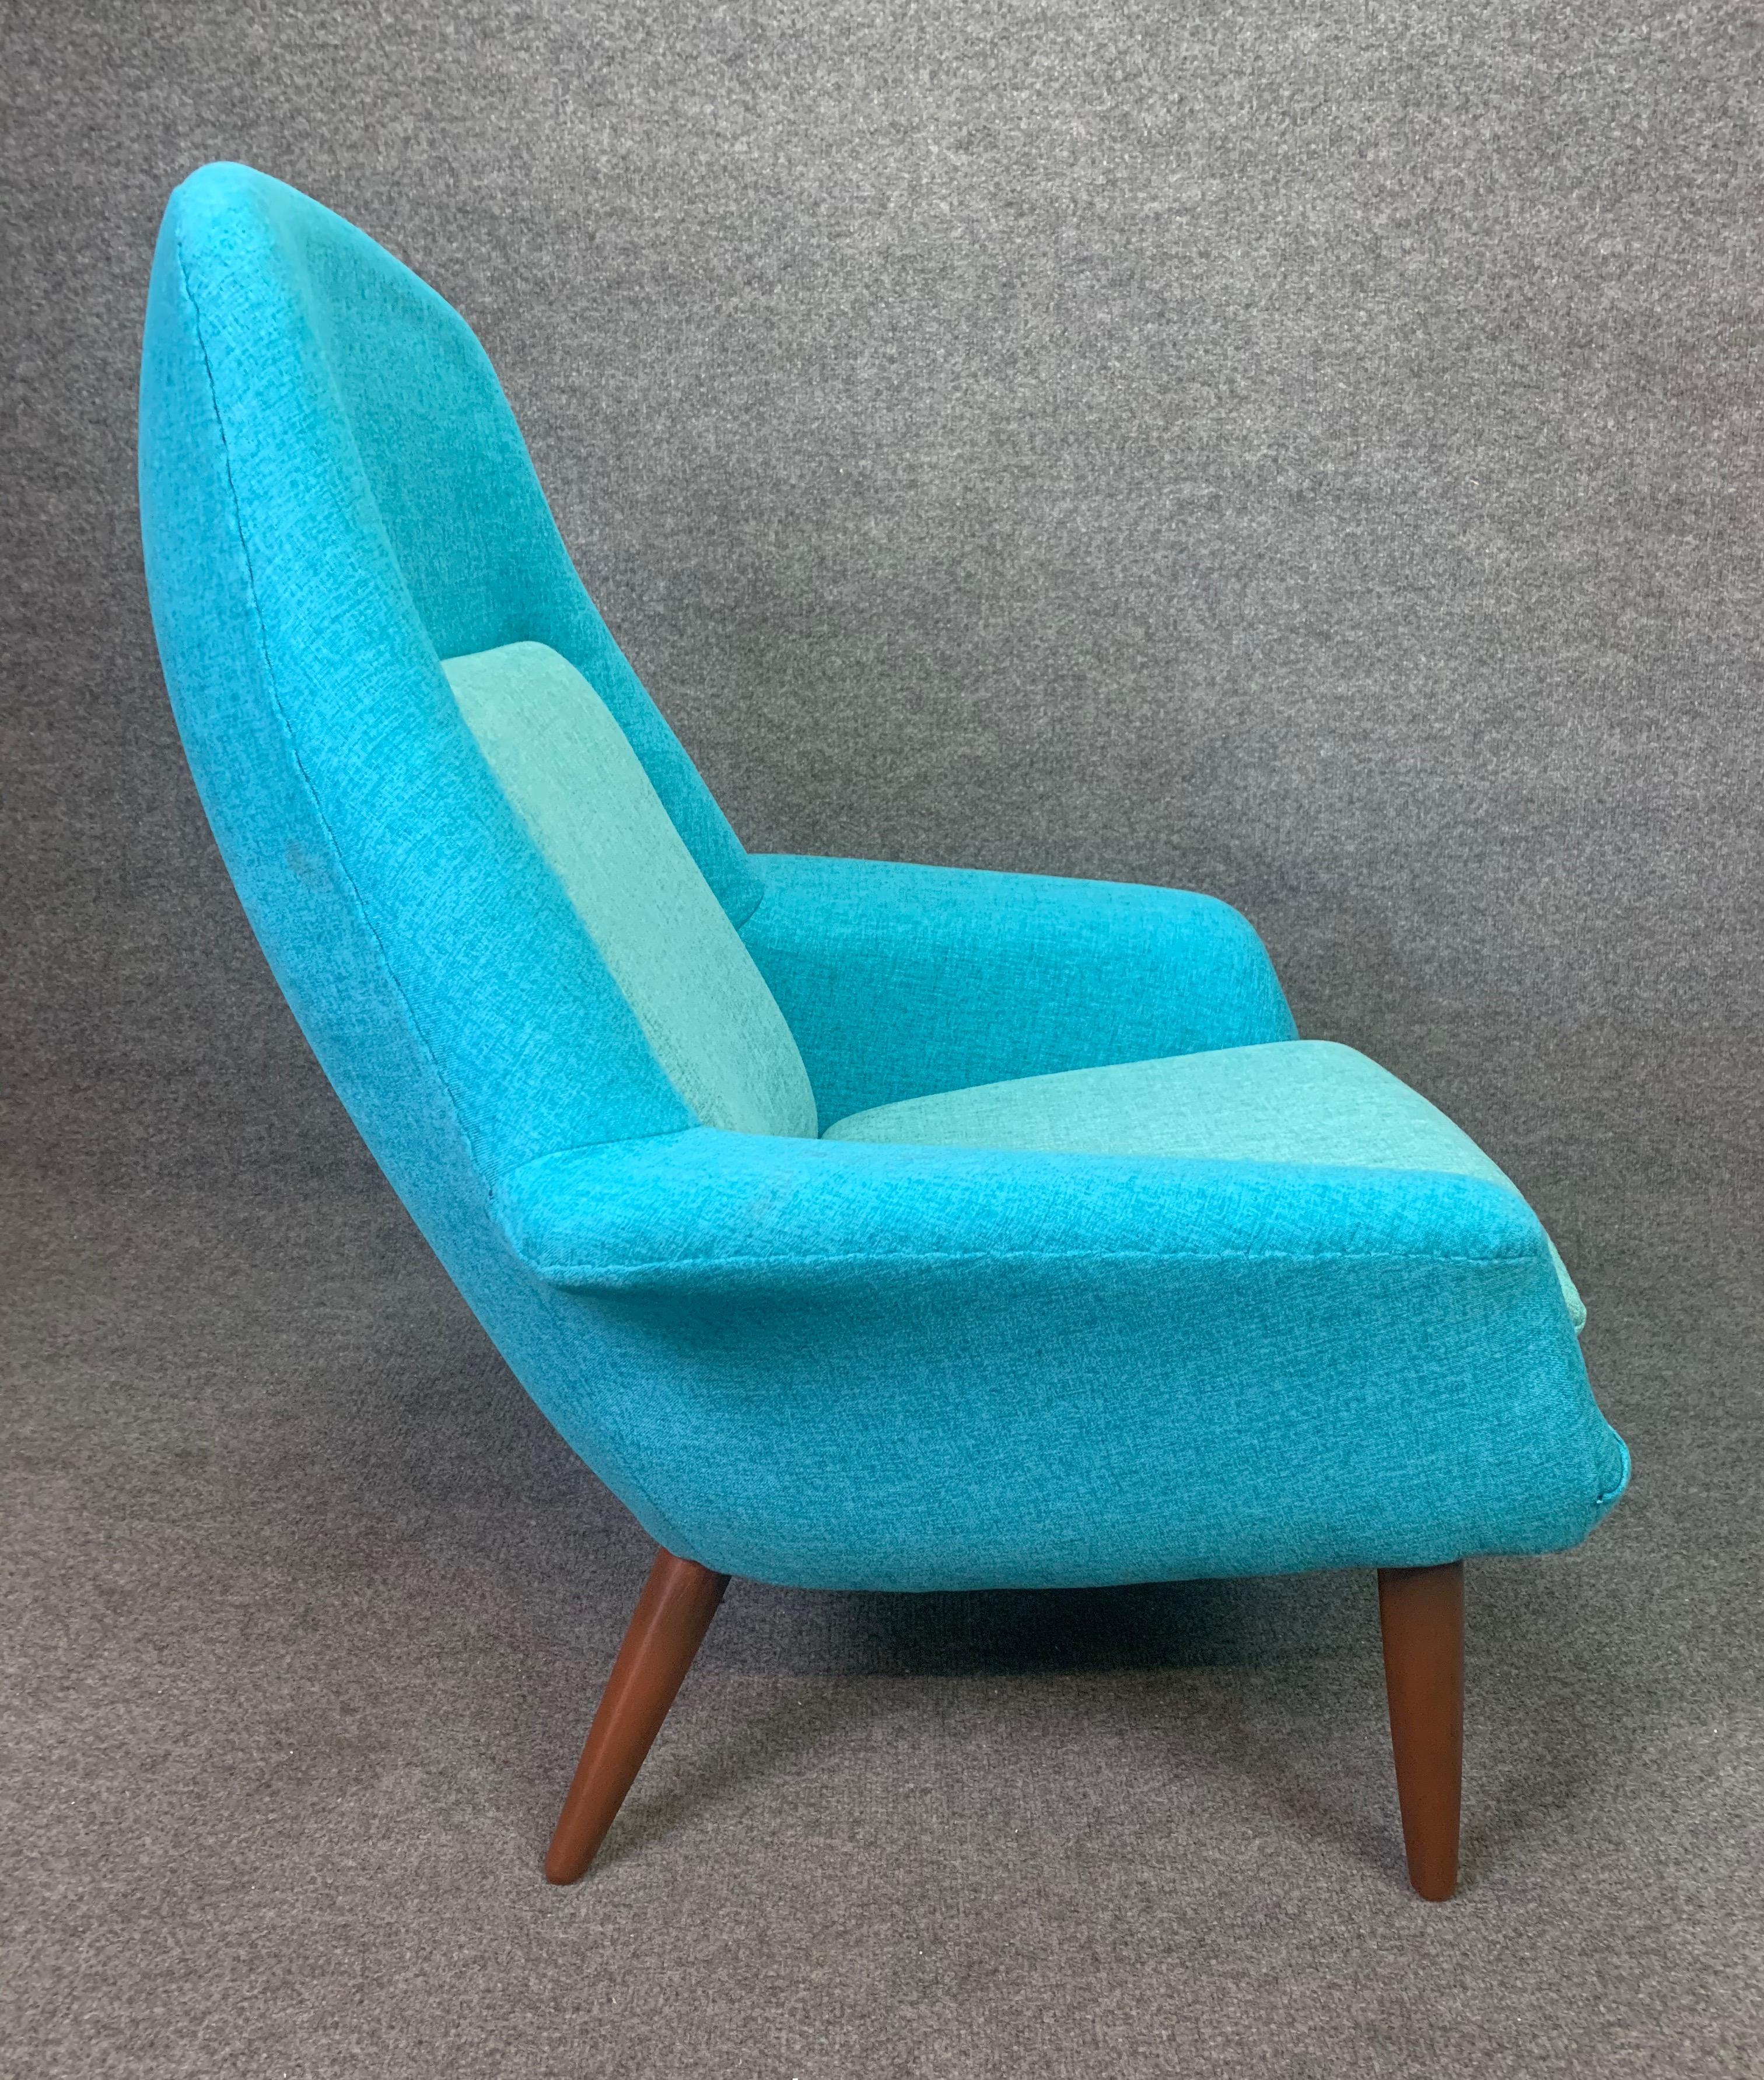 Swedish Vintage Scandinavian Mid-Century Modern Lounge Chair by Broderna Anderssons For Sale